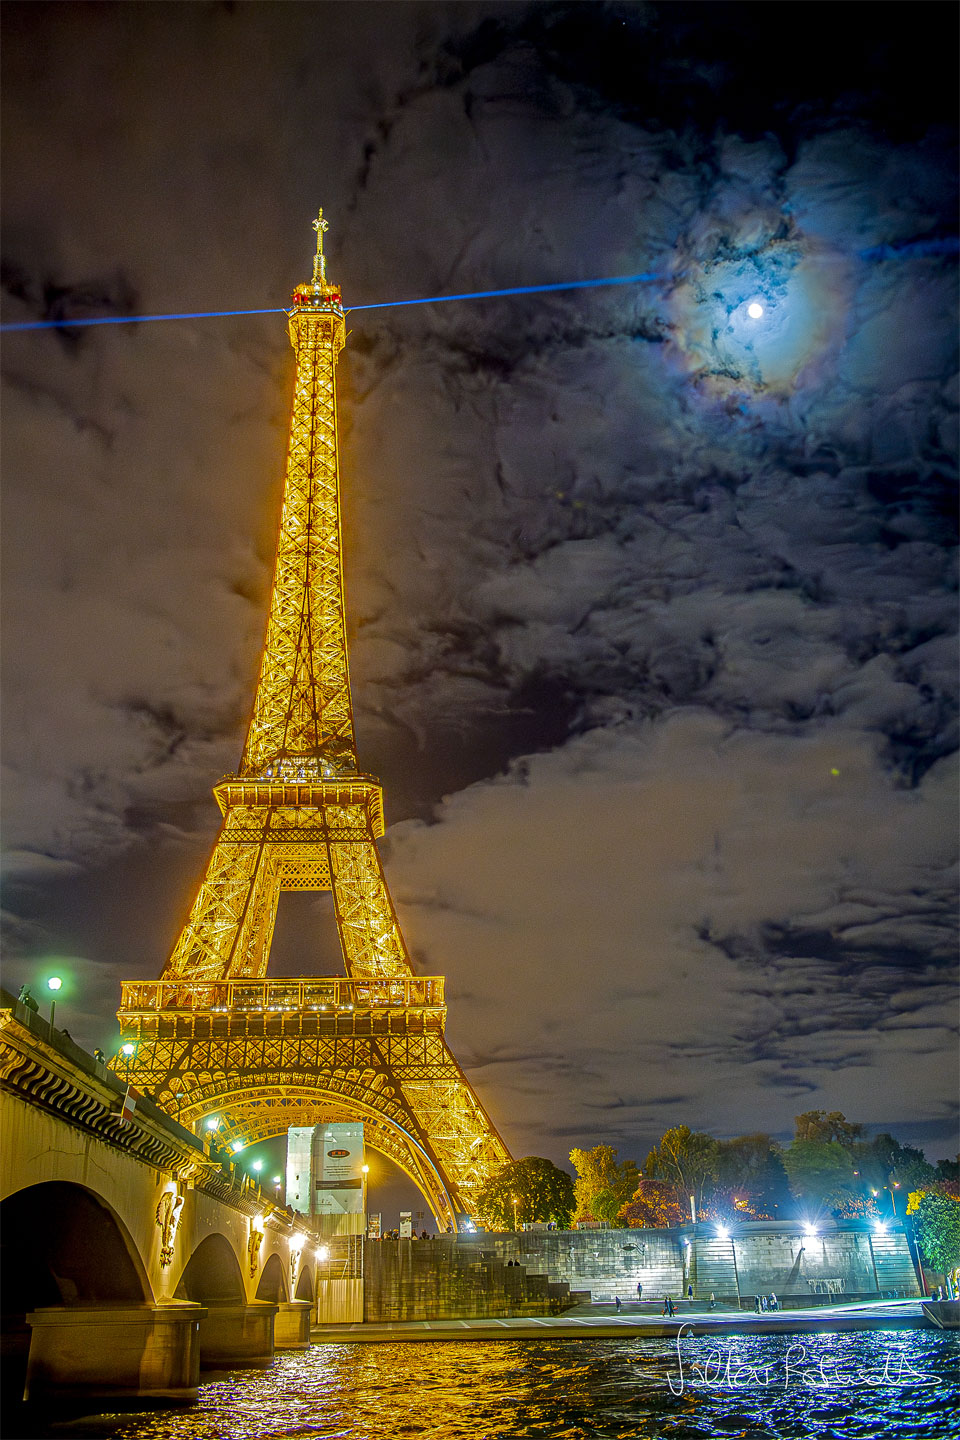 The famous Eiffel Tower in Paris, France is pictured 
on the left lit up in gold at night. A blue laser shines
out from the top. Clouds dot the background sky. The Moon
is also visible through the clouds, but is circled by 
colorful rings: a lunar corona.
Please see the explanation for more detailed information.